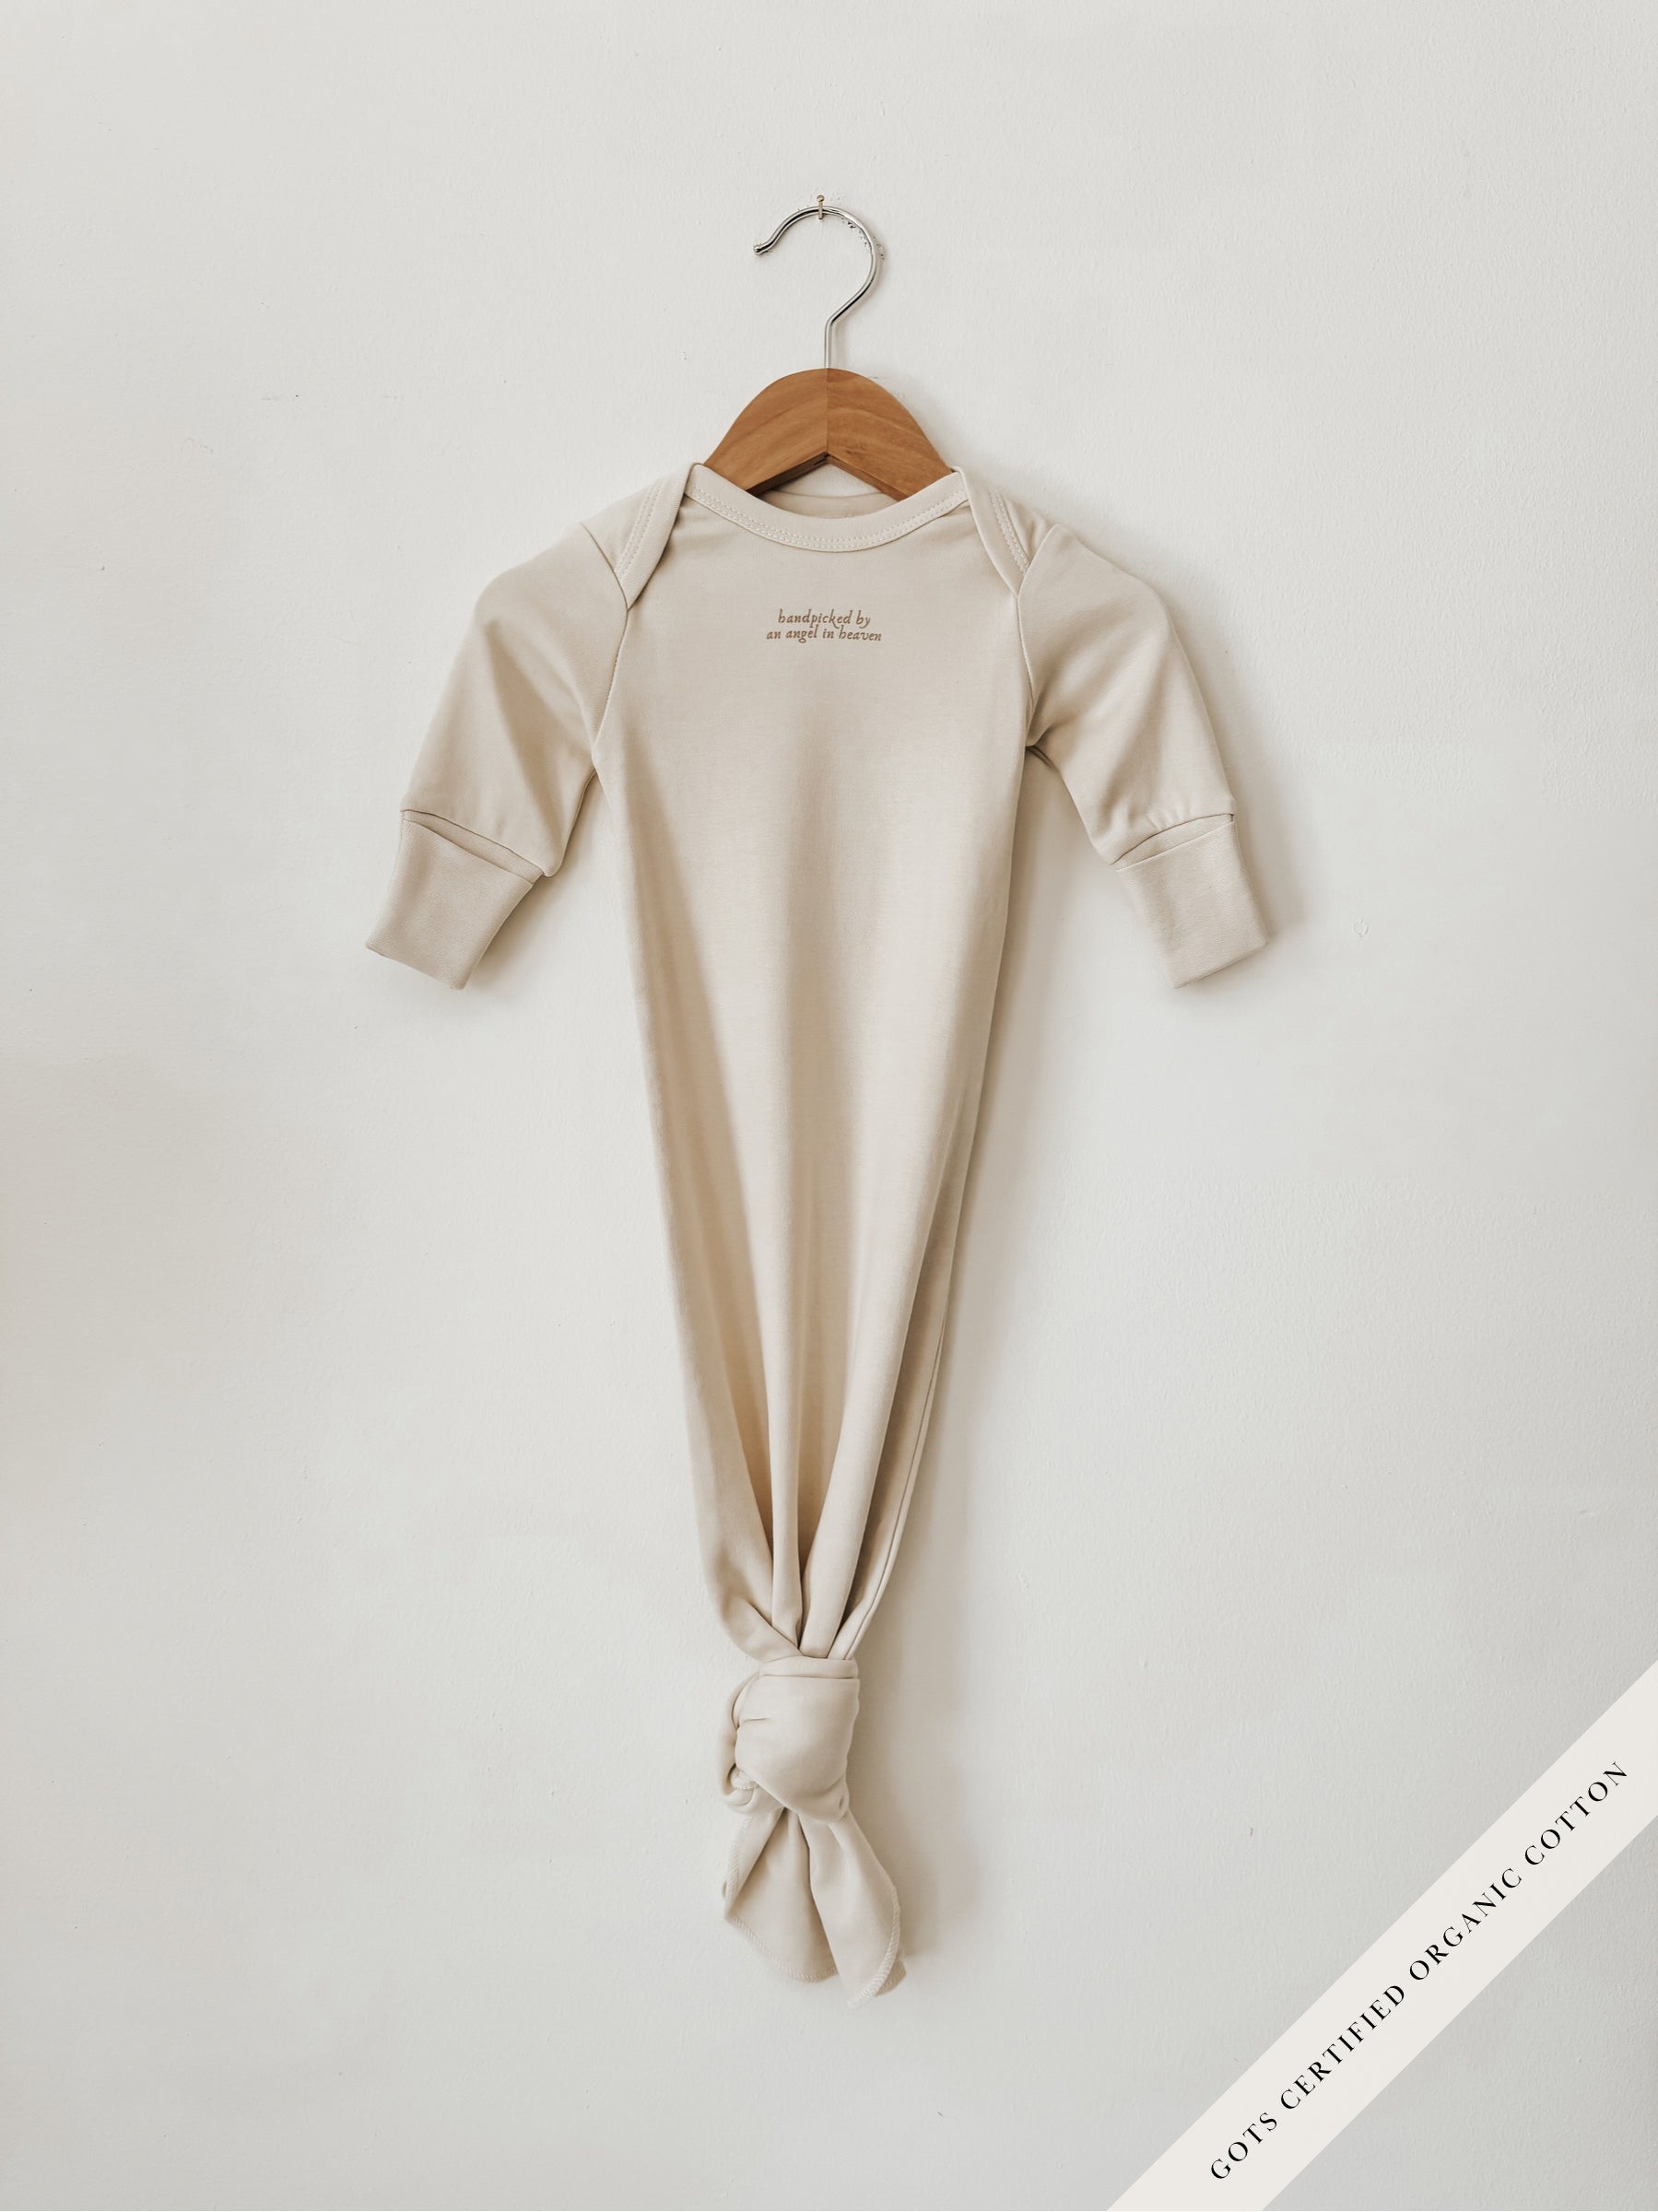 Classic Knotted Gown | Hand Picked By An Angel